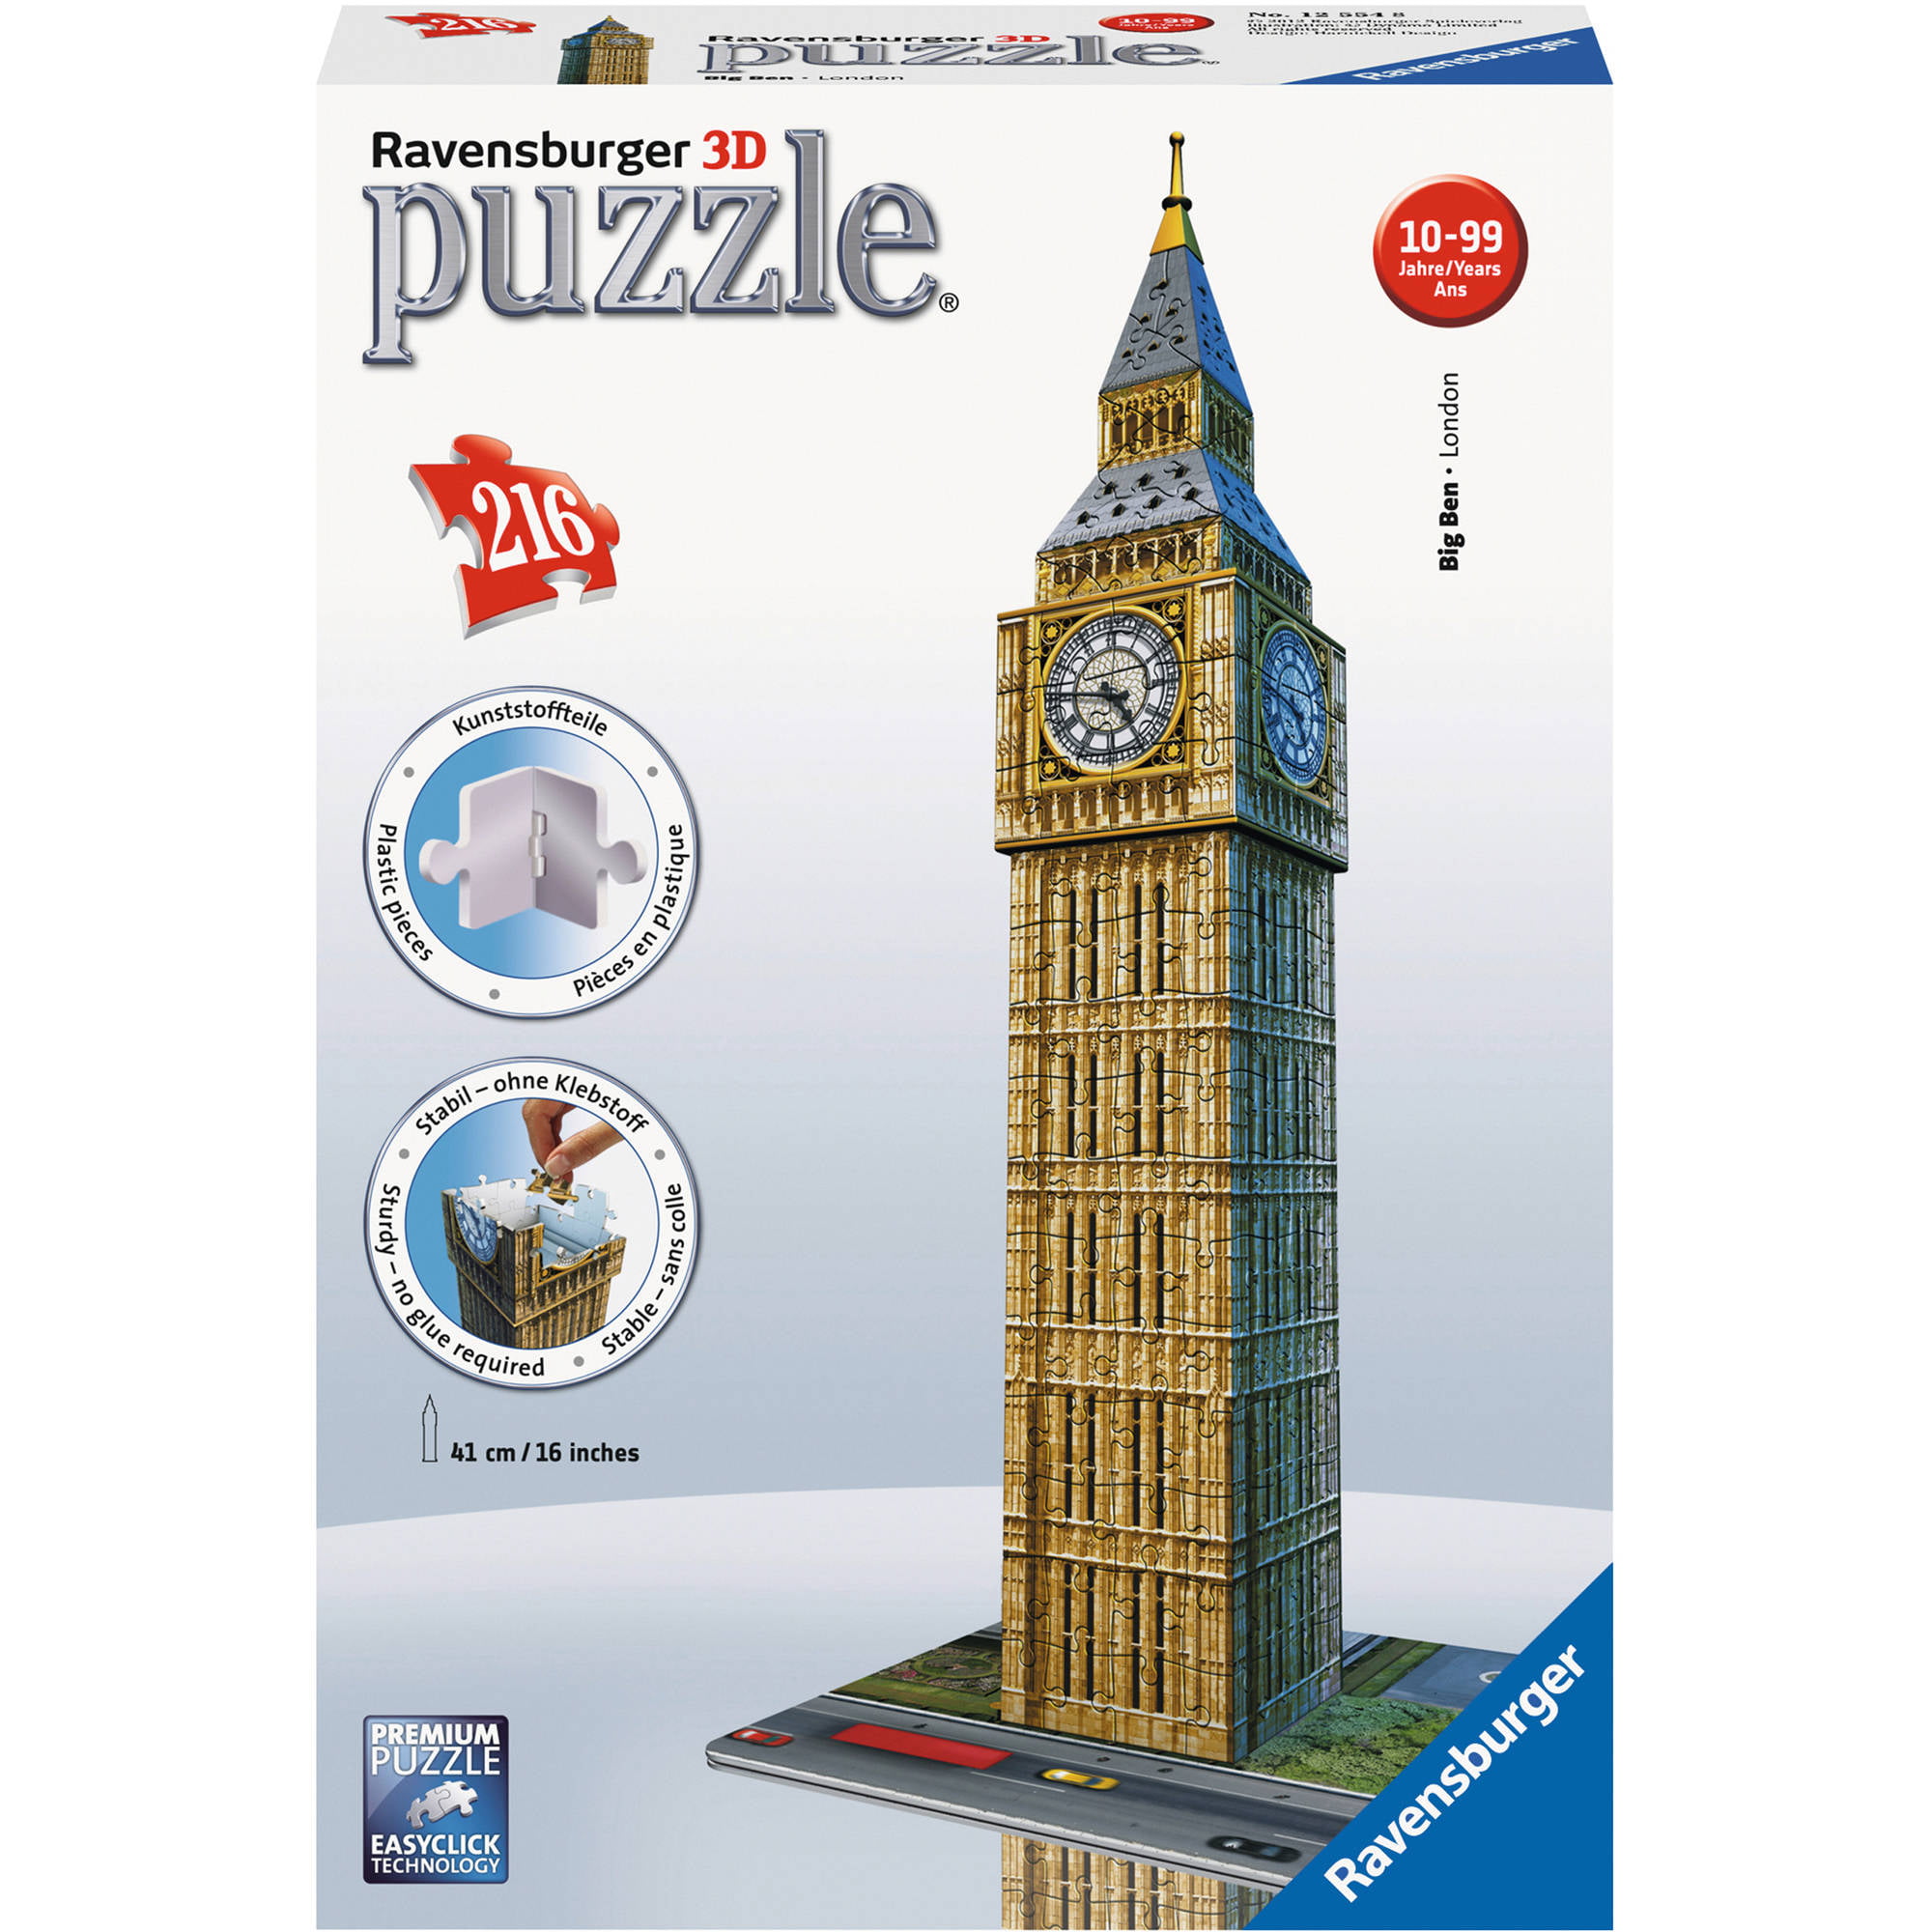 3D JIGSAW 12588 Ravensburger Big Ben with light 3D Puzzle 216pc New in Box!